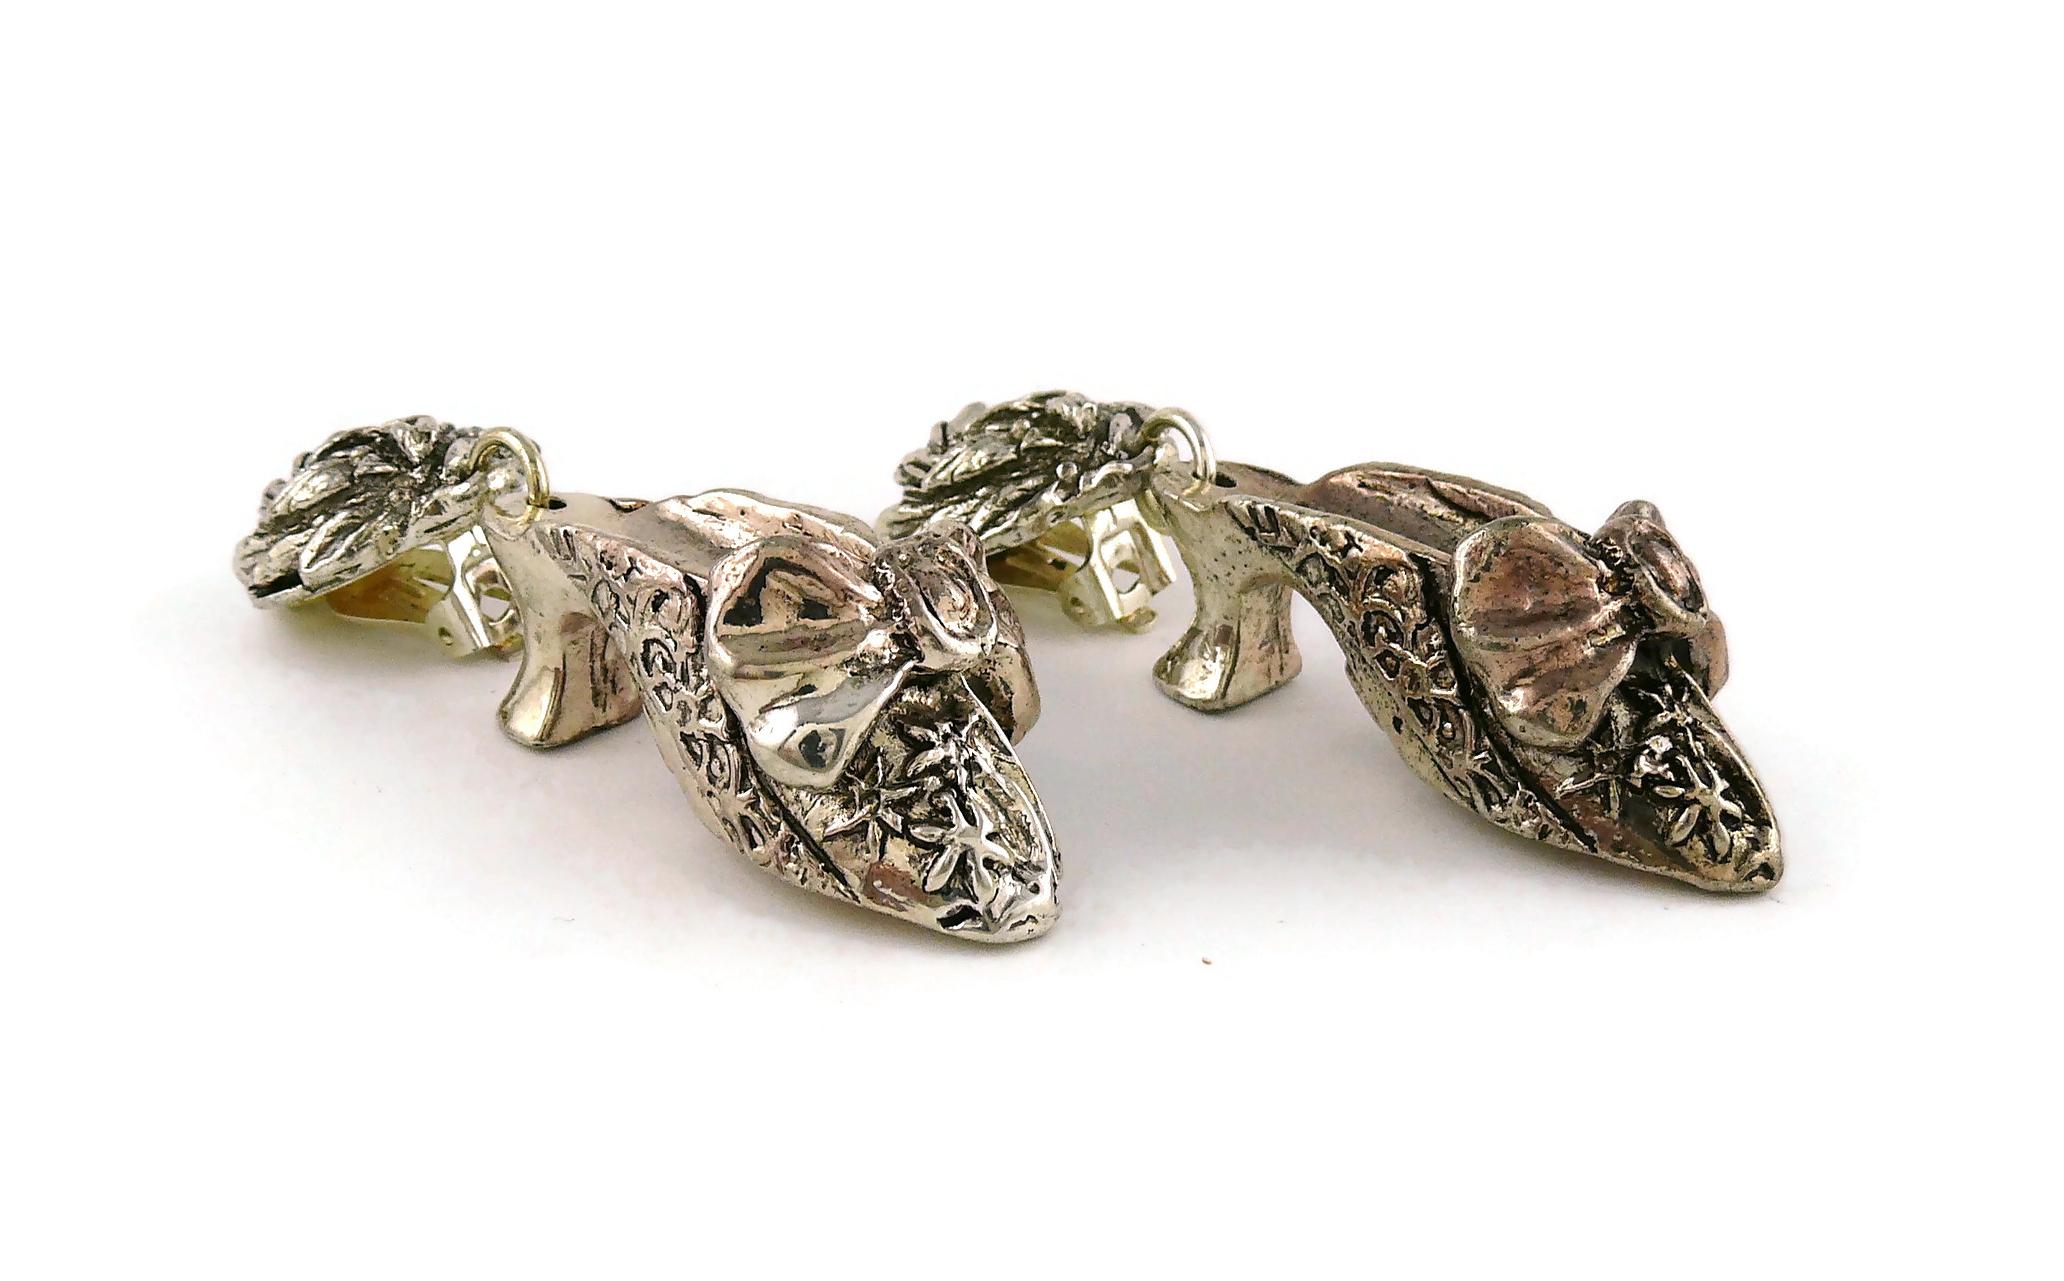 Chantal Thomass Vintage Novelty Silver Toned Shoe Dangling Earrings In Good Condition For Sale In Nice, FR